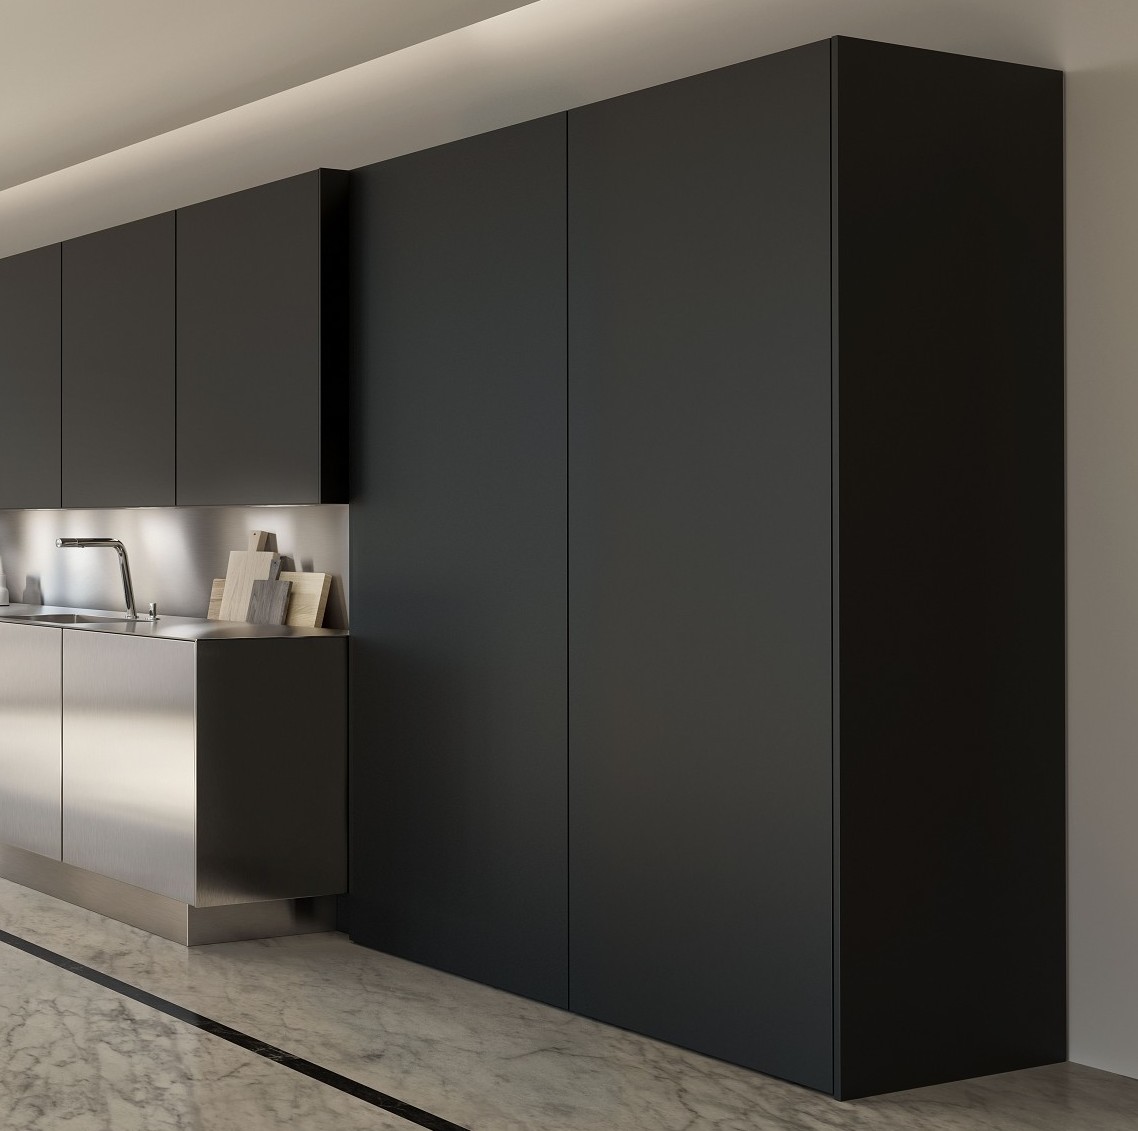 SieMatic SE cabinets from the Pure style collection in graphite grey matte lacquer with AntiPrint coating